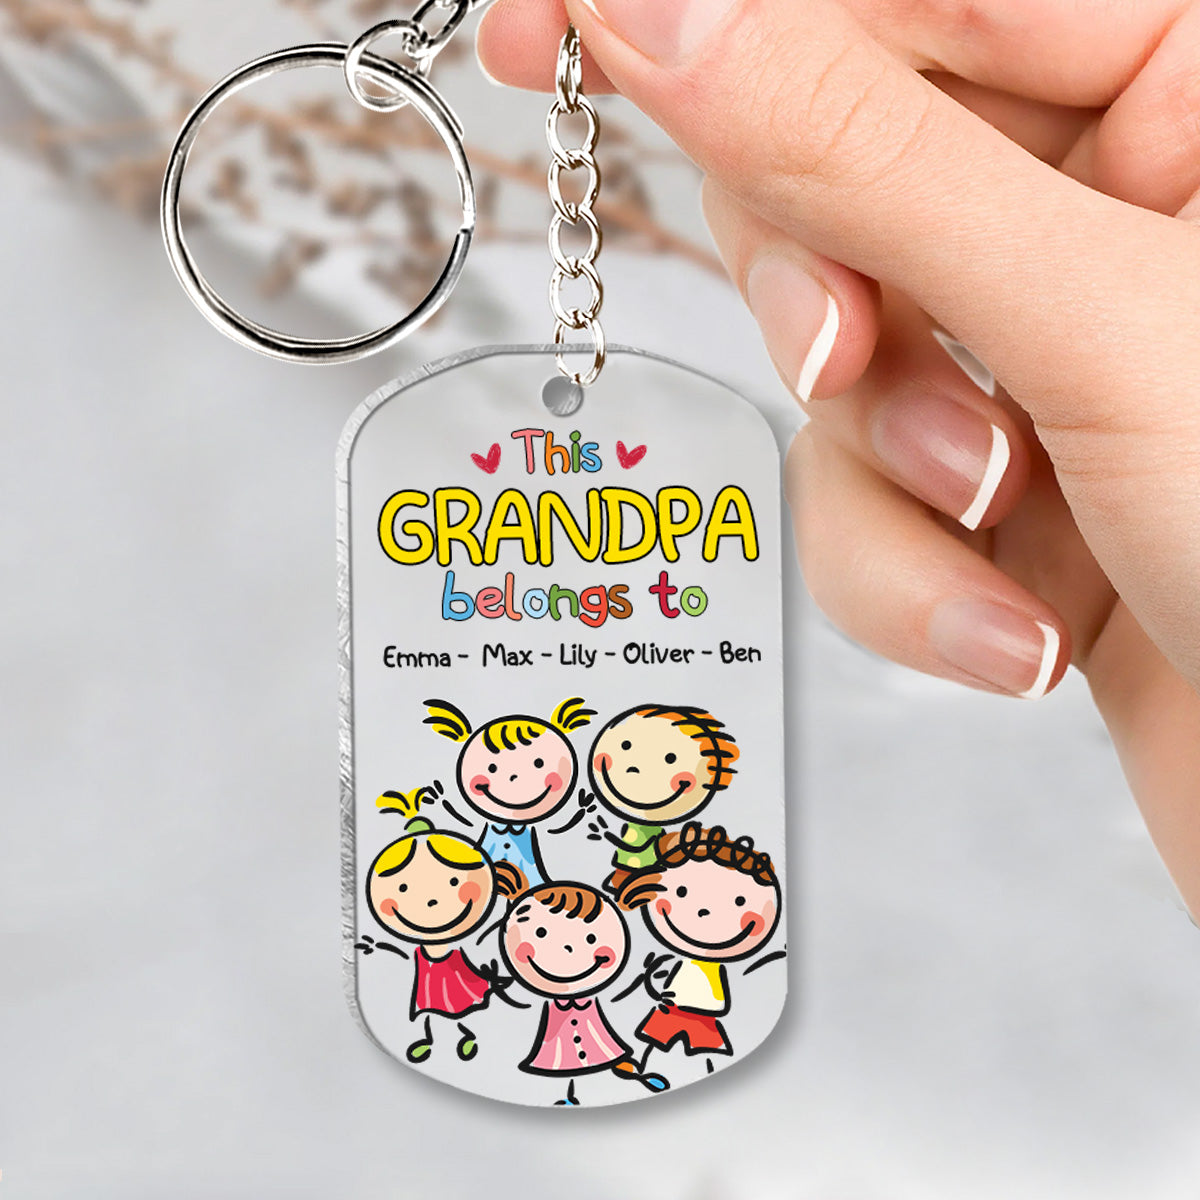 Discover This Grandpa Belongs To - Gift for grandpa, grandma, mom, dad, uncle, aunt, brother, sister - Personalized Keychain